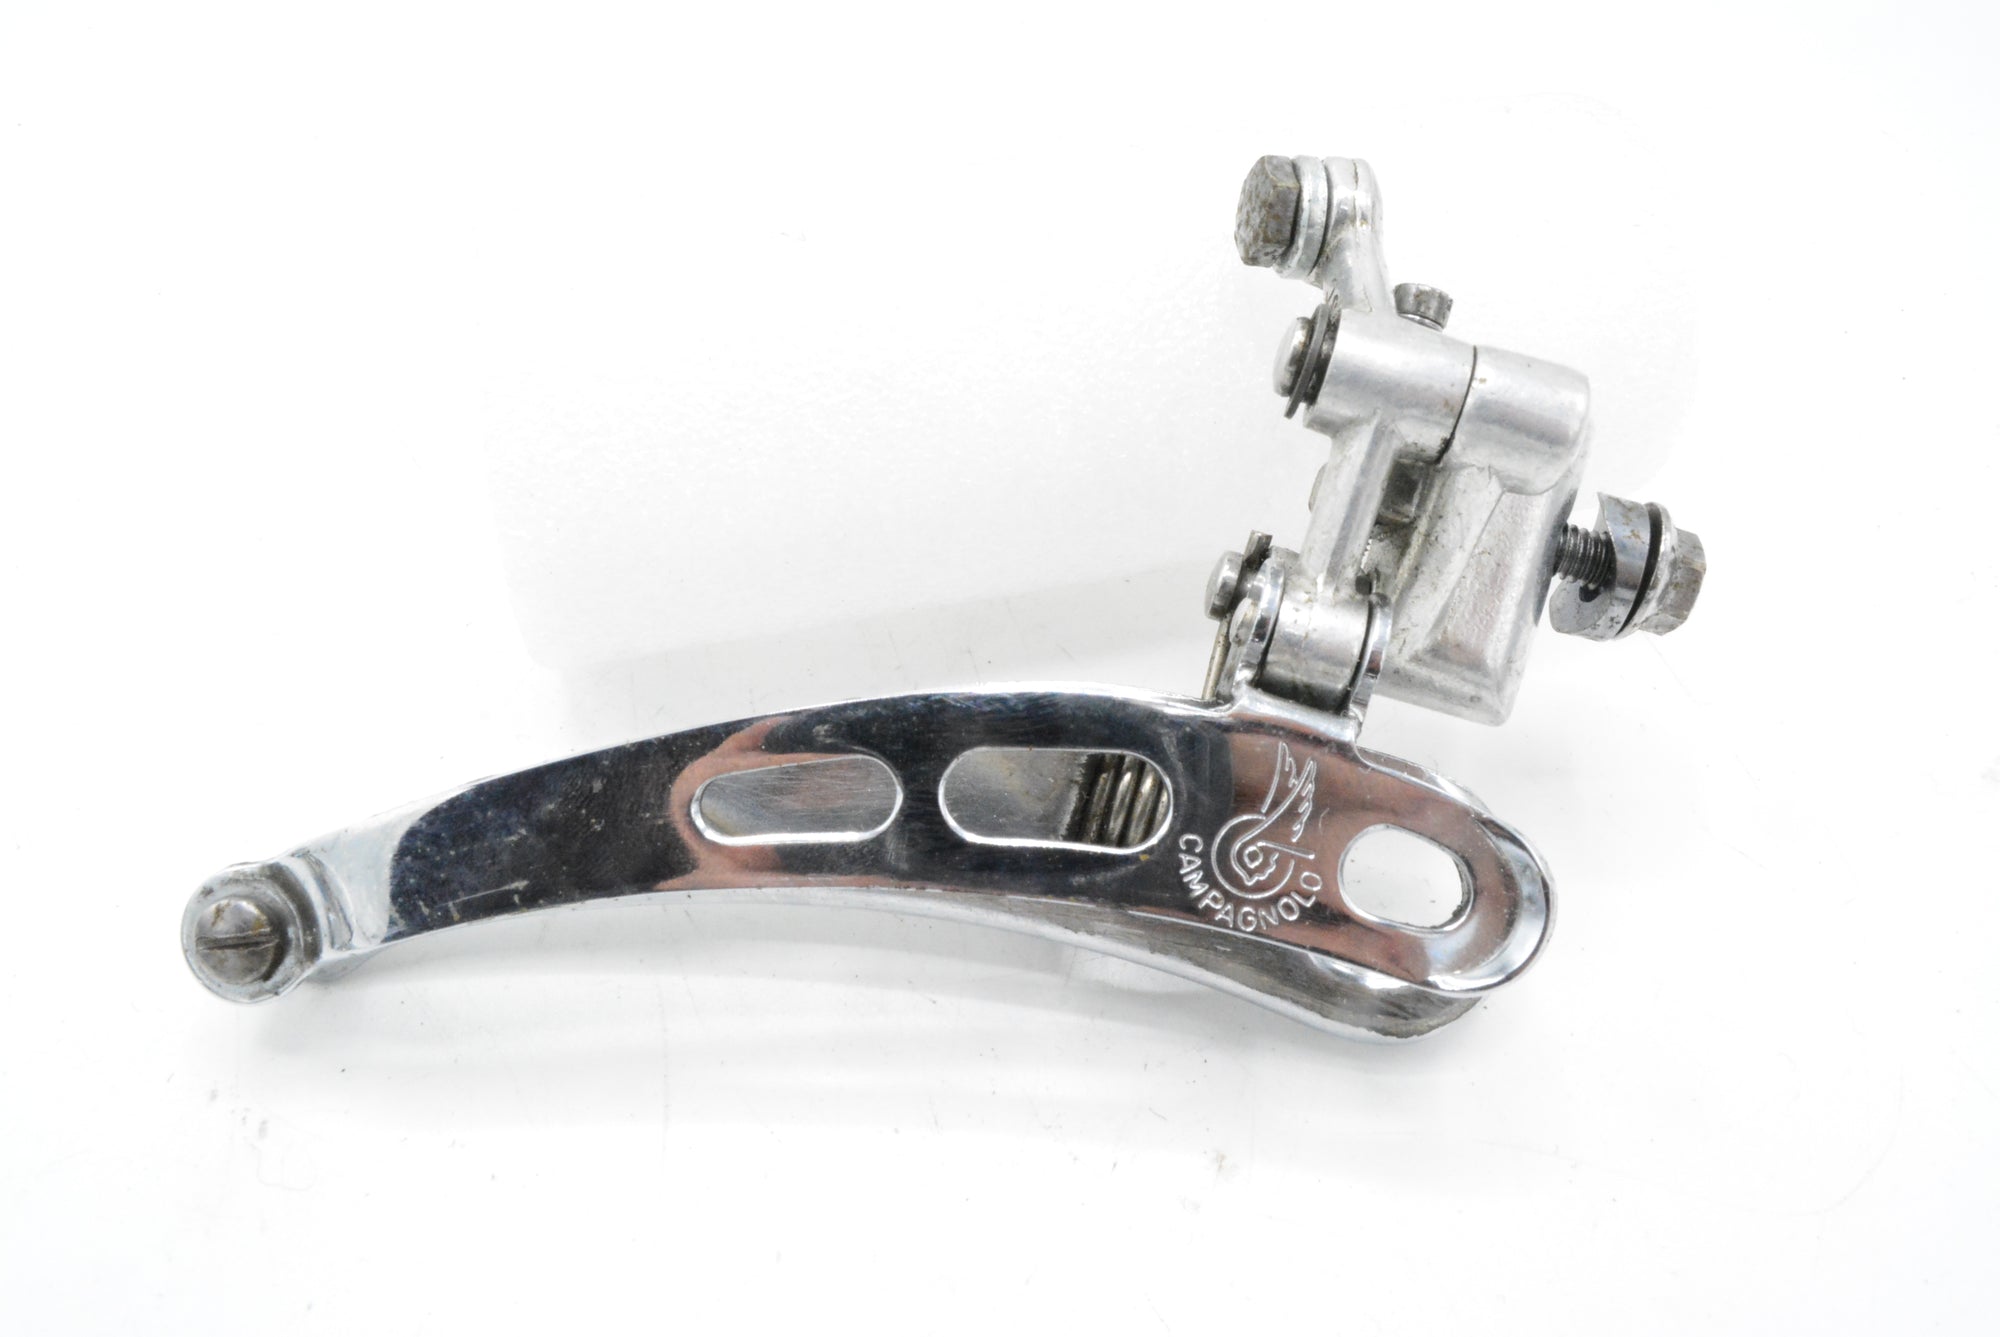 Campagnolo Umwerfer Record 1052 Vintage Front Derailleur